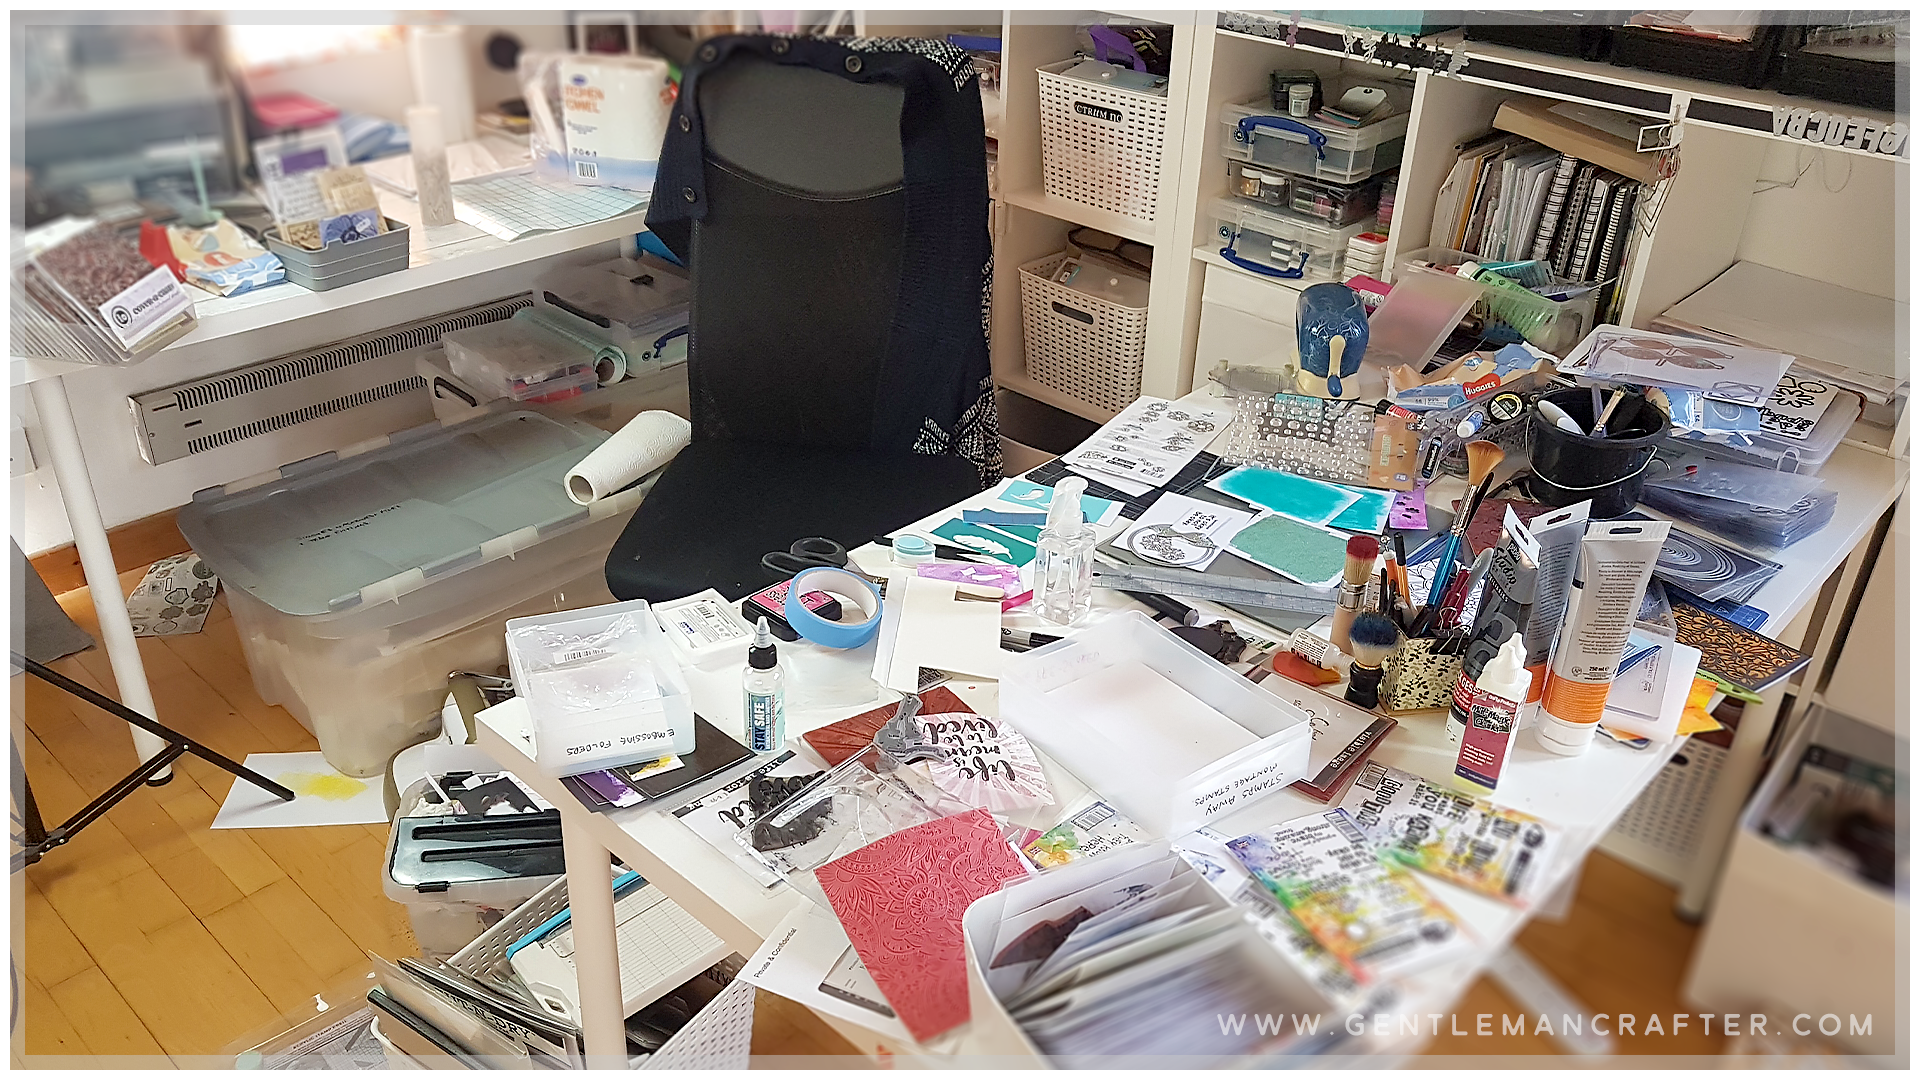 An image of a messy craft room.